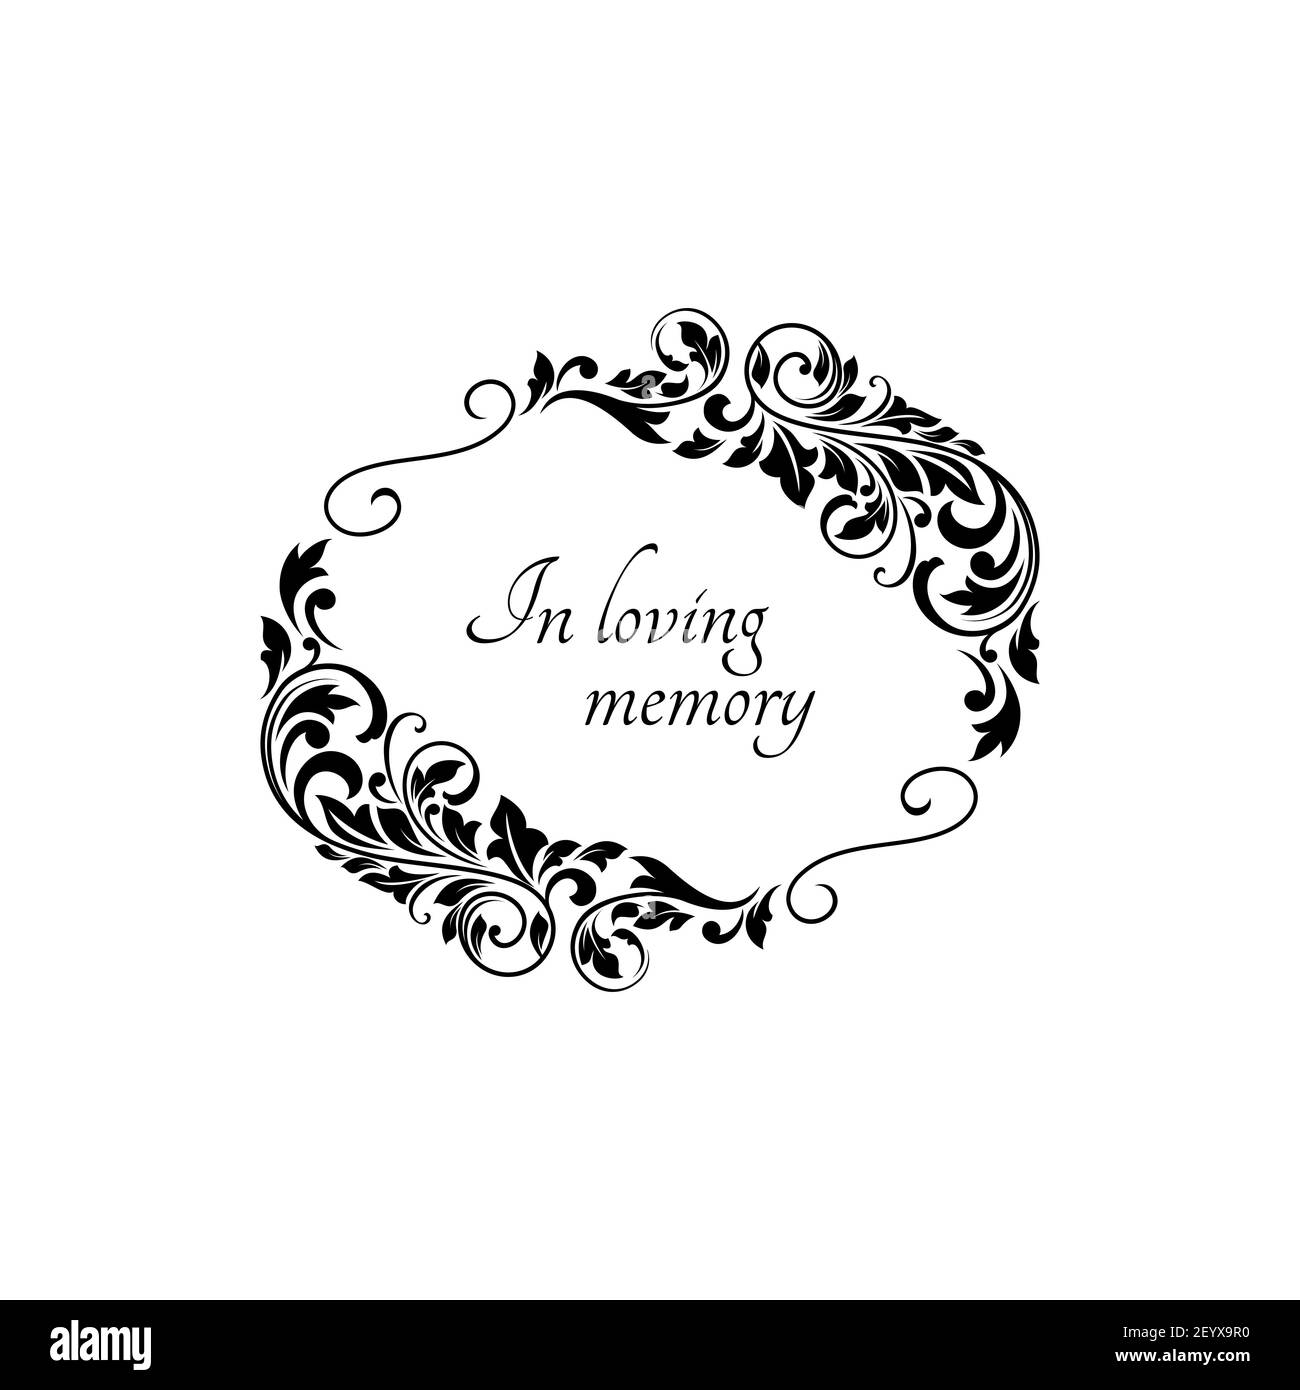 Funeral vector card with floral wreath. Funeral mourning retro frame with floral decoration and condolence text in loving memory. Vintage black mortua Stock Vector